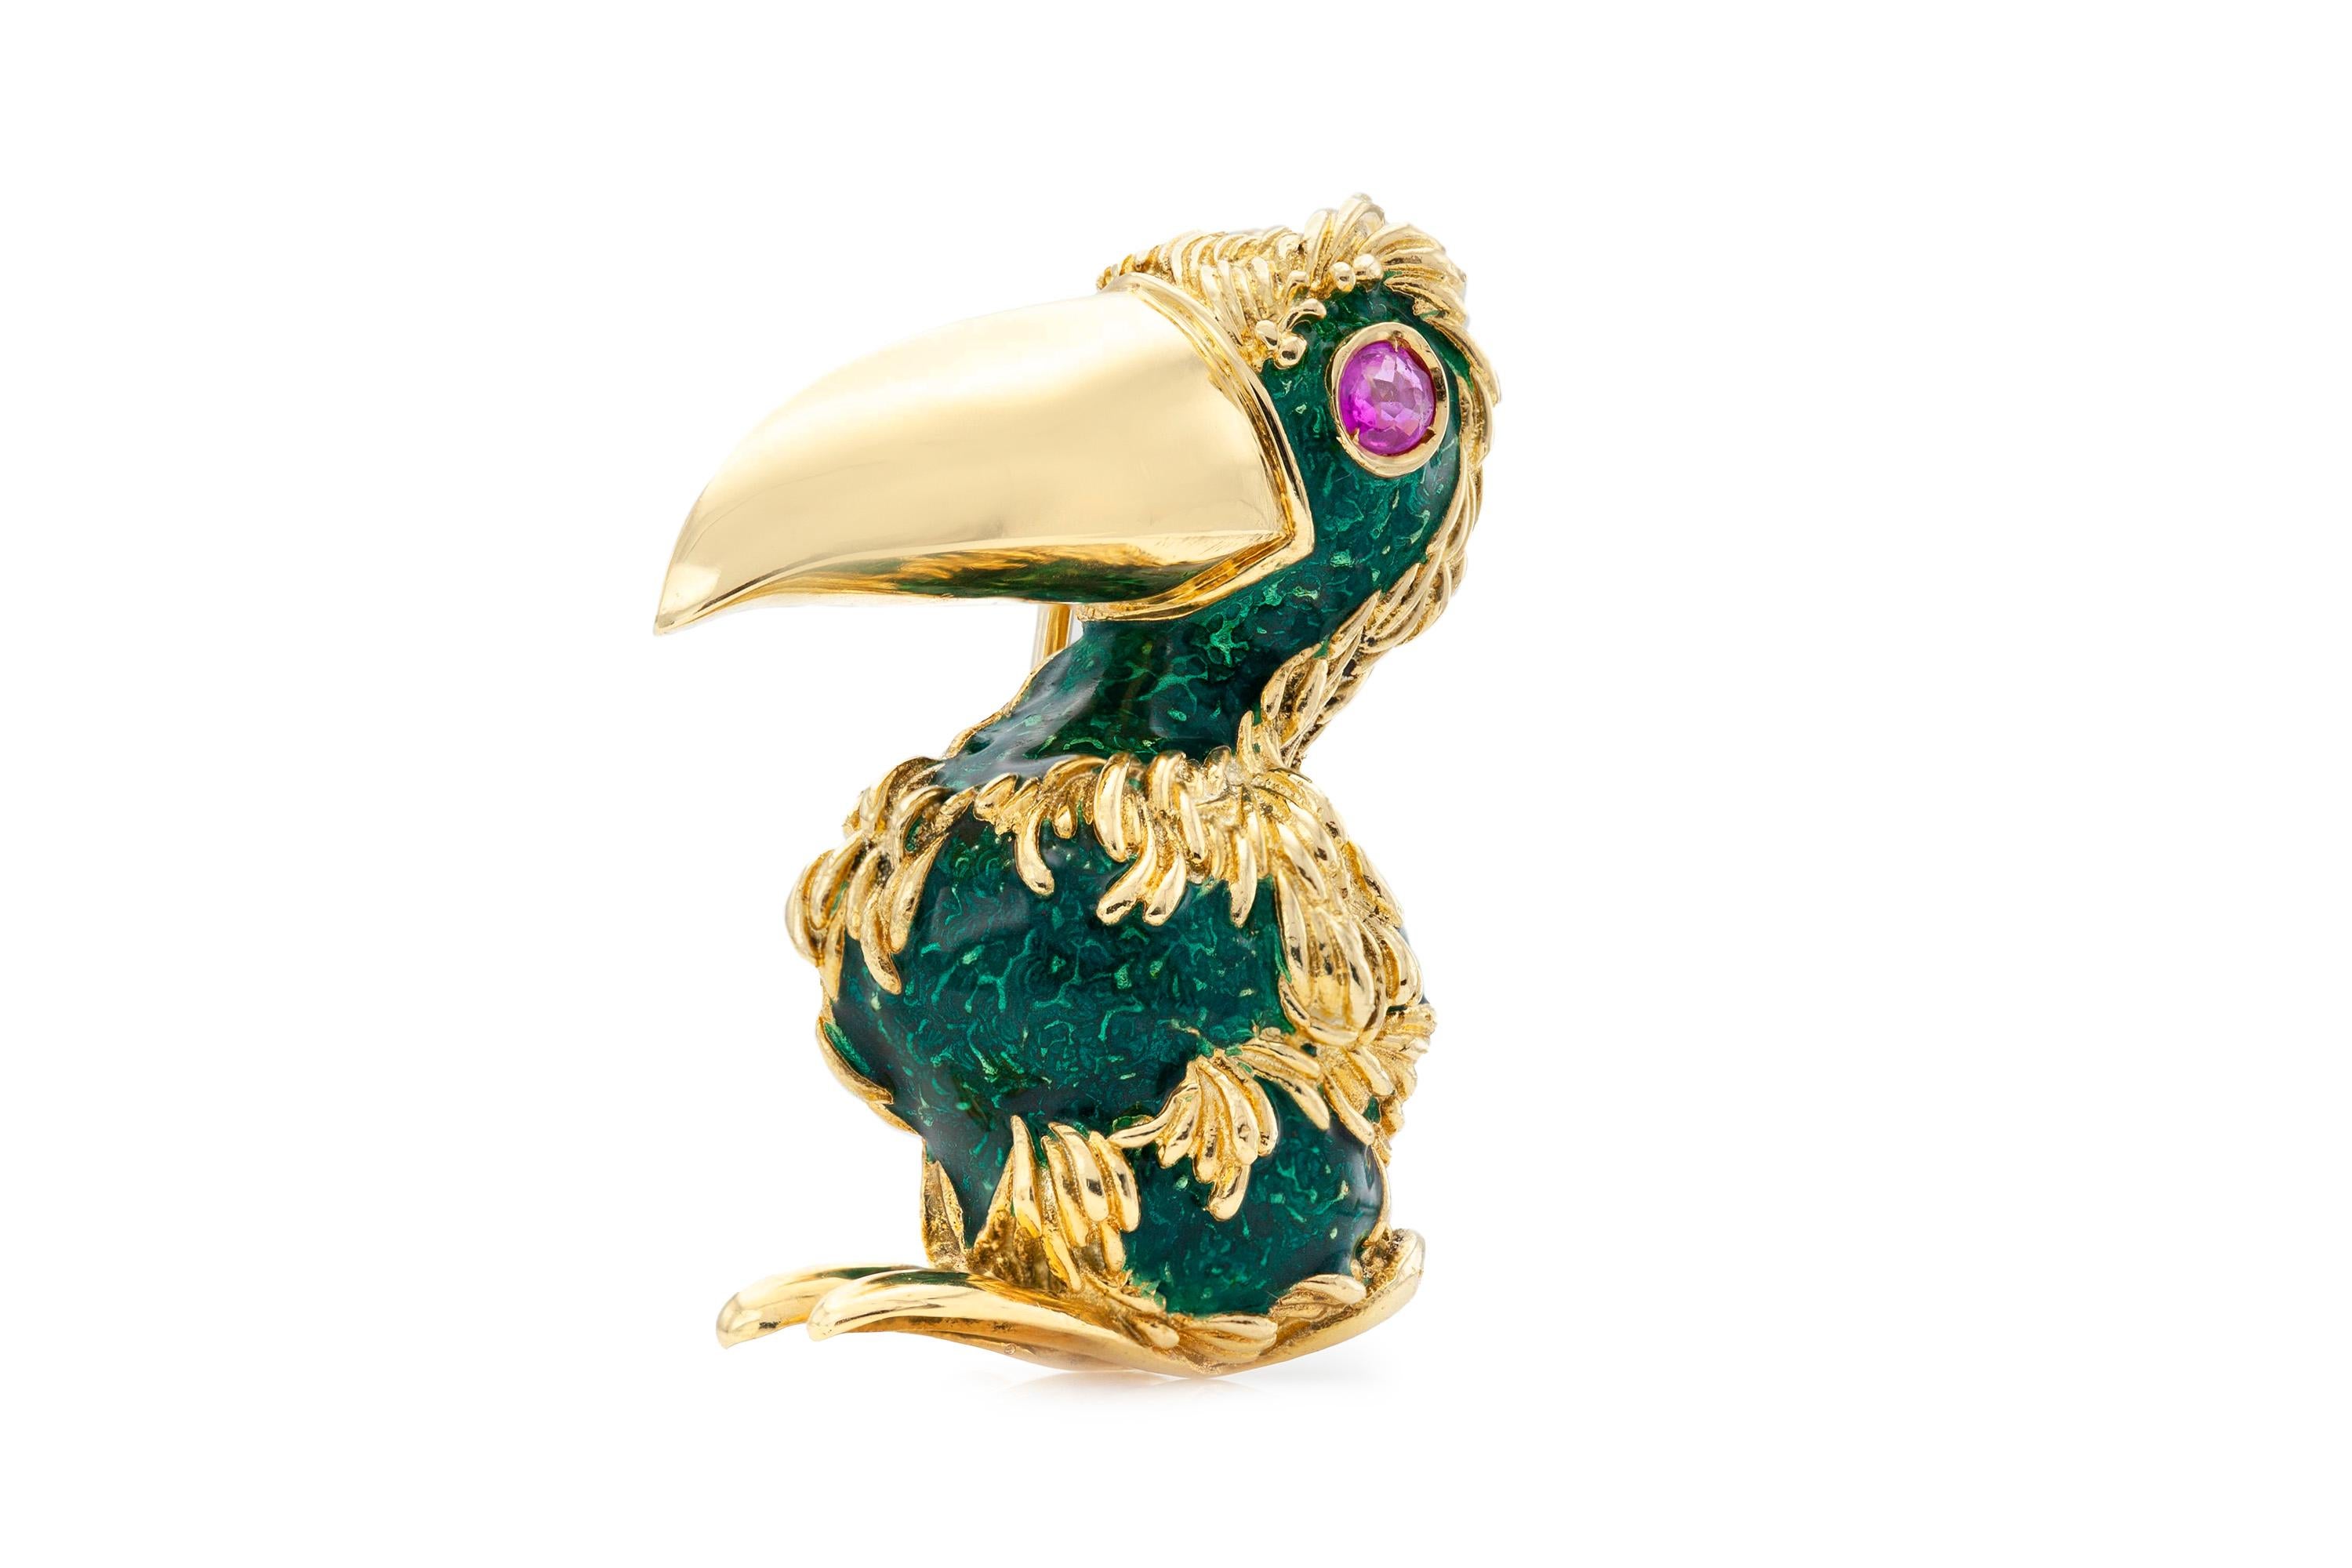 Finley crafted in 18K yellow gold and green enamel with a Ruby as the eye.
Made in Italy.